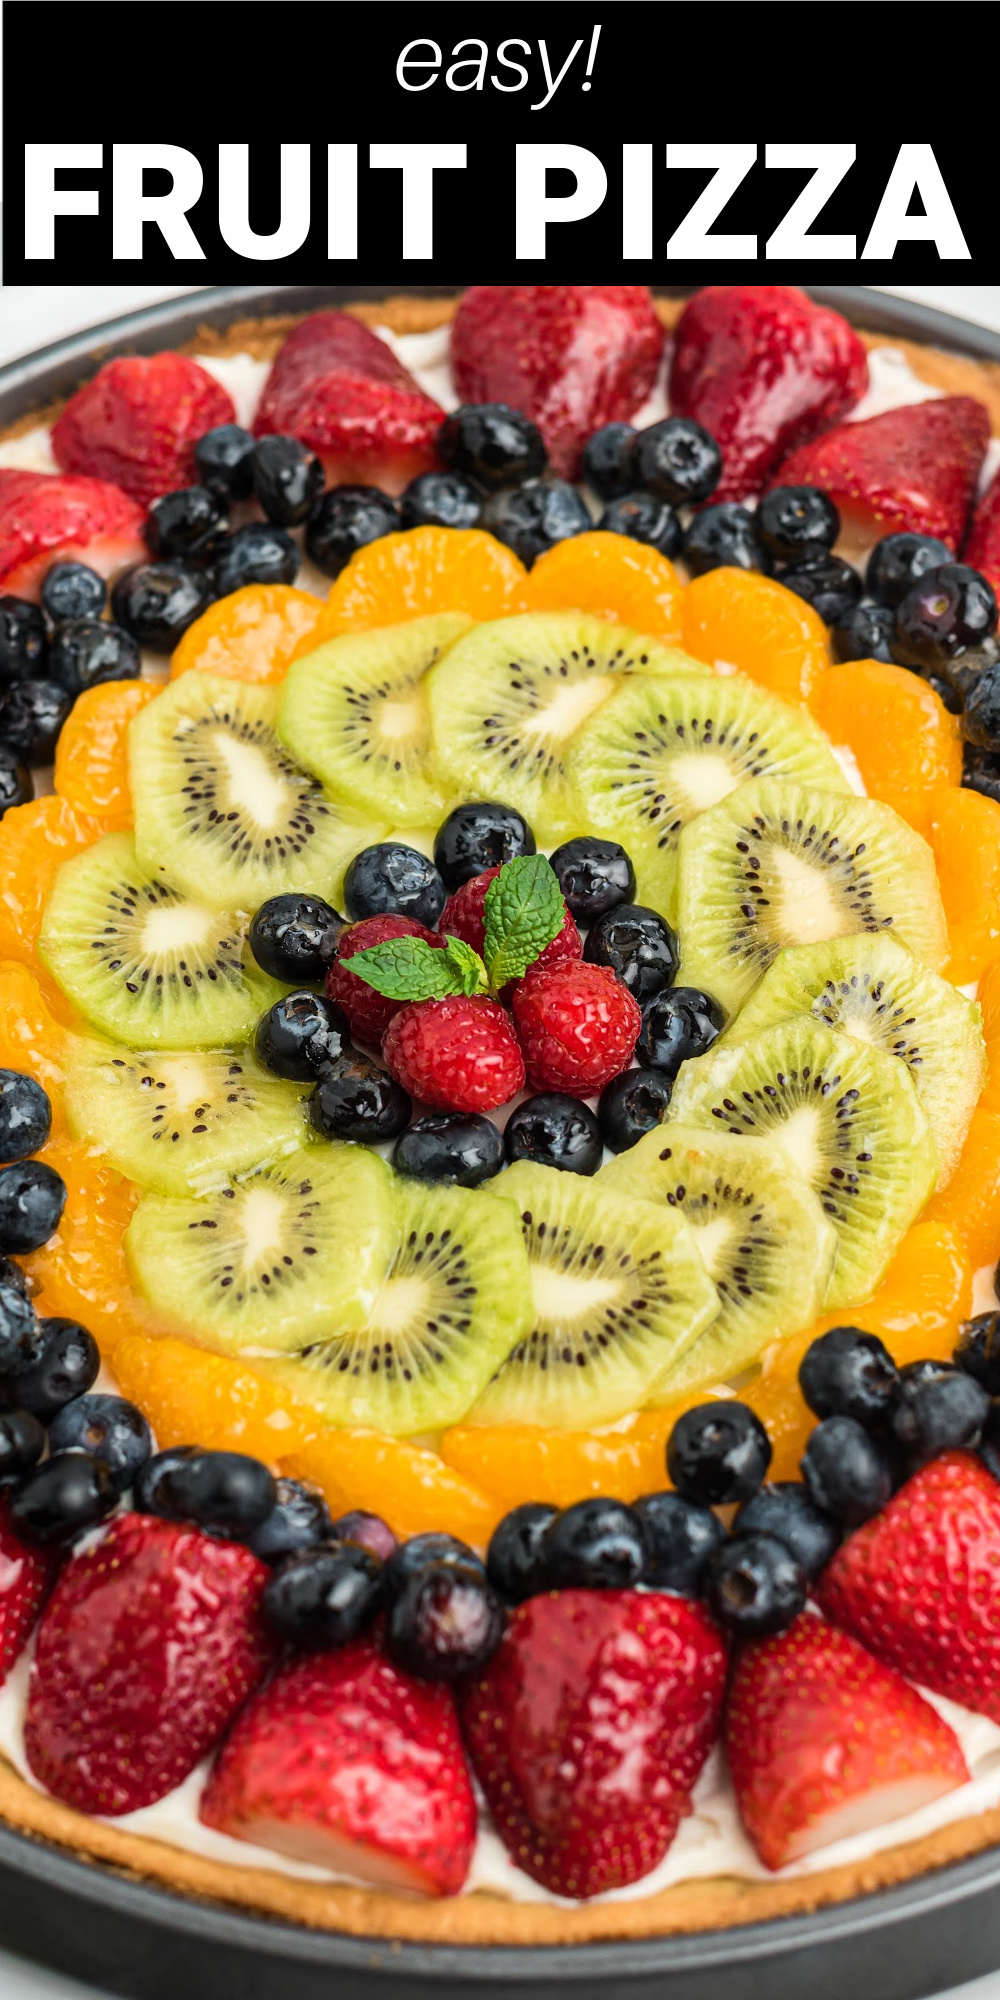 Fruit Pizza is covered bursting with colorful fresh fruit full of naturally sweet flavors on a sugar cookie crust. It has dreamy cream cheese frosting that make this fruit dessert absolutely irresistible.